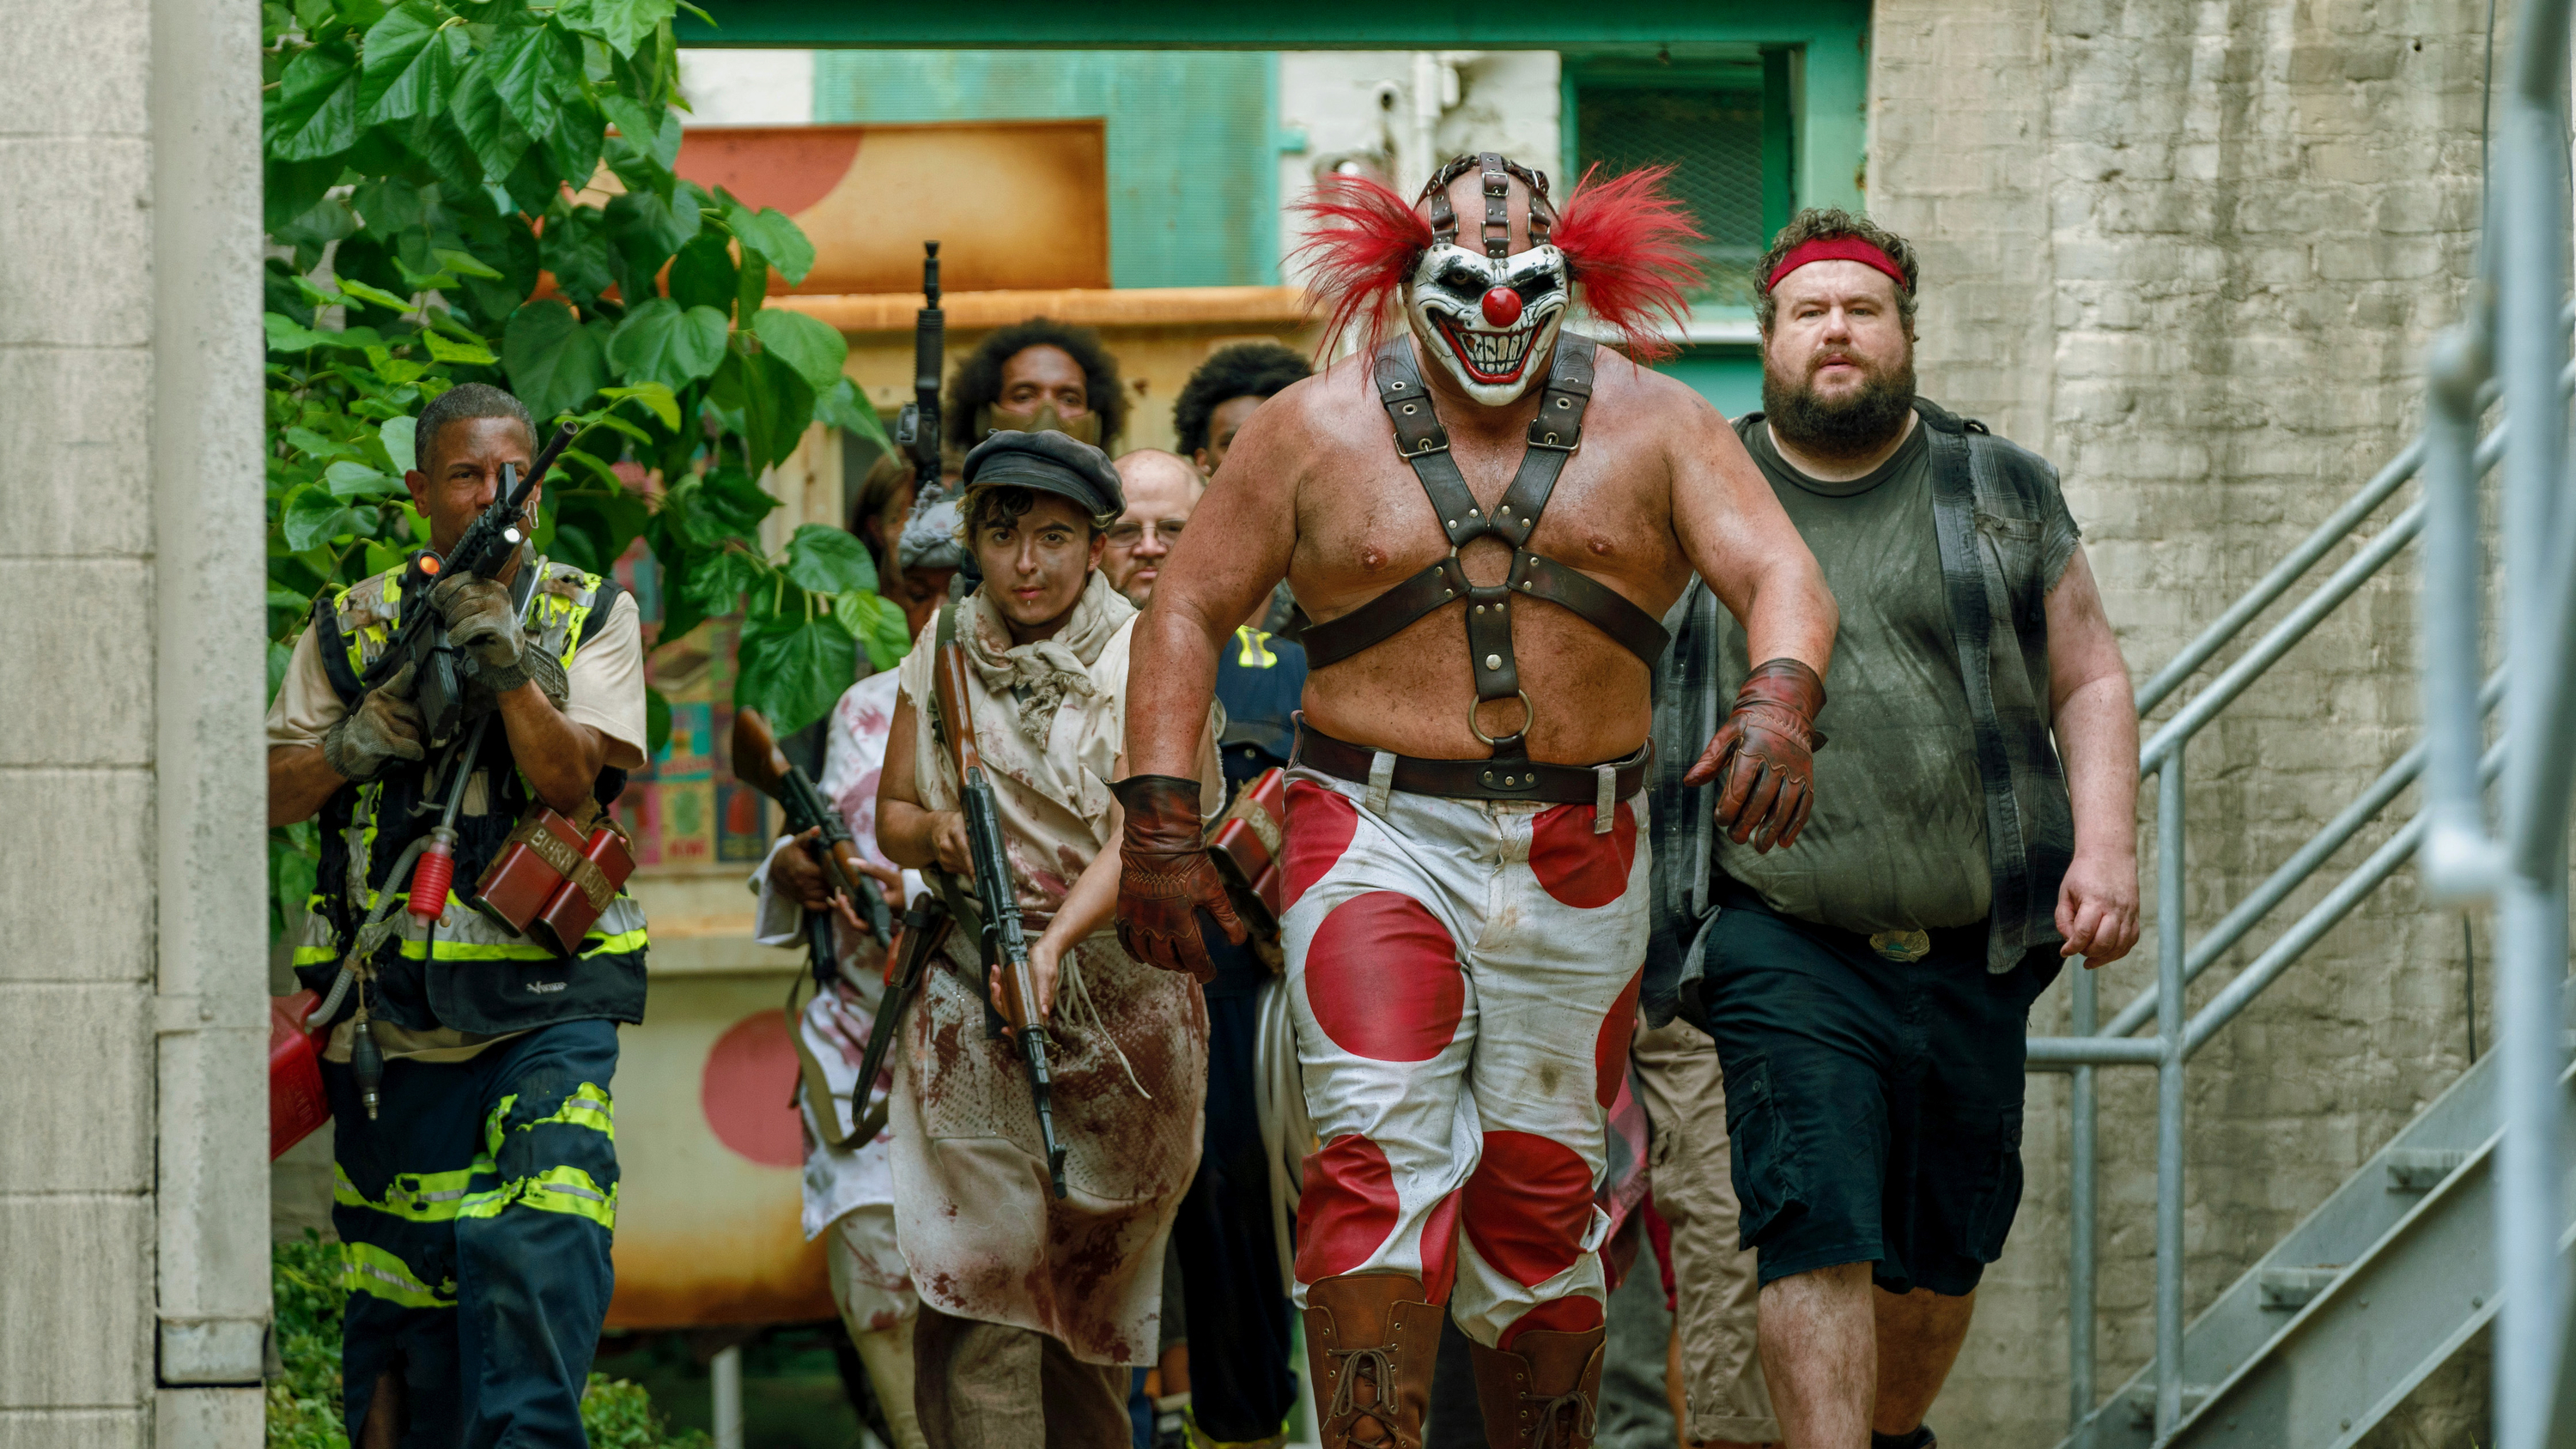 Group of individuals in various costumes and attire walking down an urban alley, led by a person with dramatic makeup and warrior-like outfit